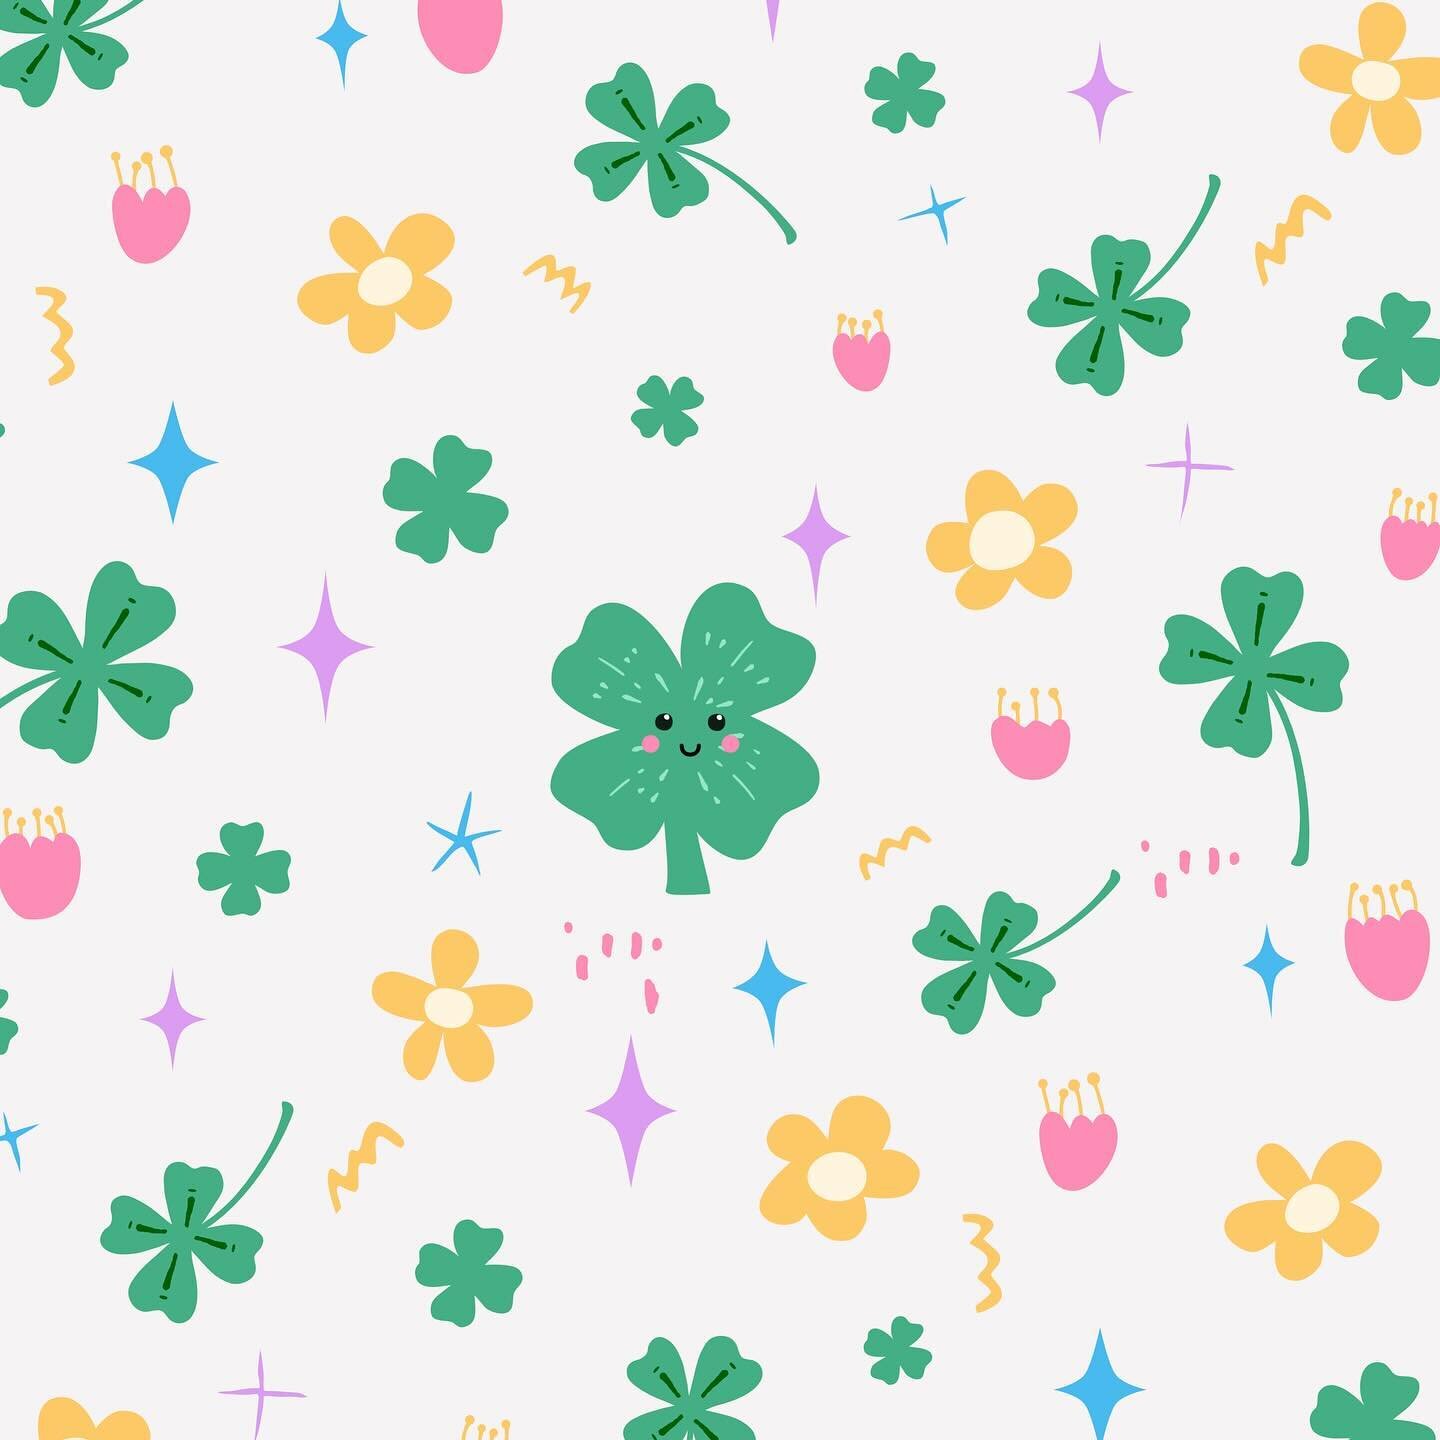 Happy St. Patrick&rsquo;s Day! Cute little clovers for a bit of luck and good cheer today 🤗🍀🇮🇪🌈 My son has an uncanny knack of finding four leaf clovers. If there is one where he&rsquo;s looking, he&rsquo;ll find it. He&rsquo;s found eight to da